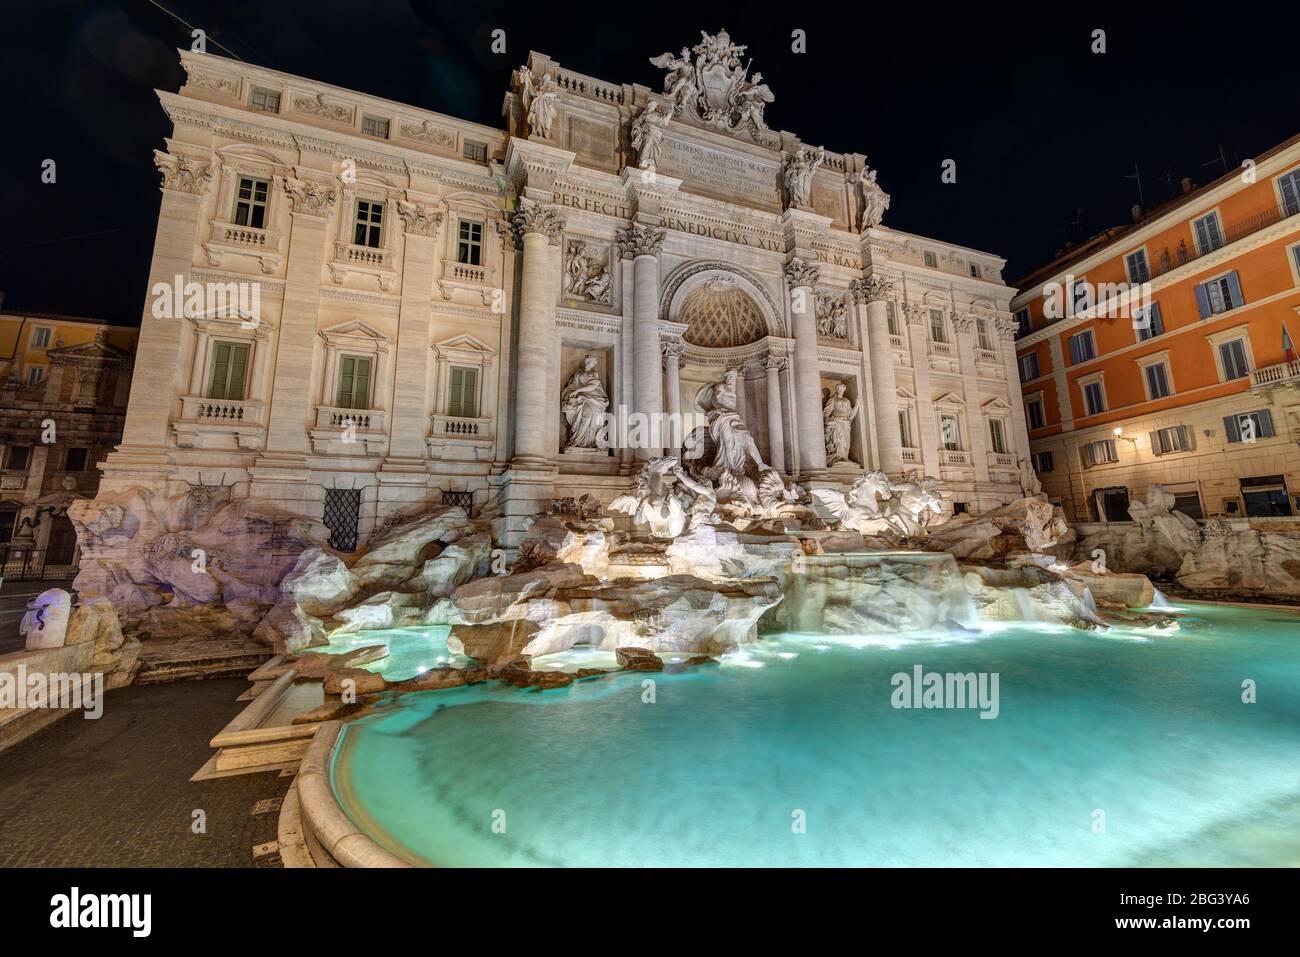 The famous Fontana di Trevi in Rome at night with no people Stock Photo